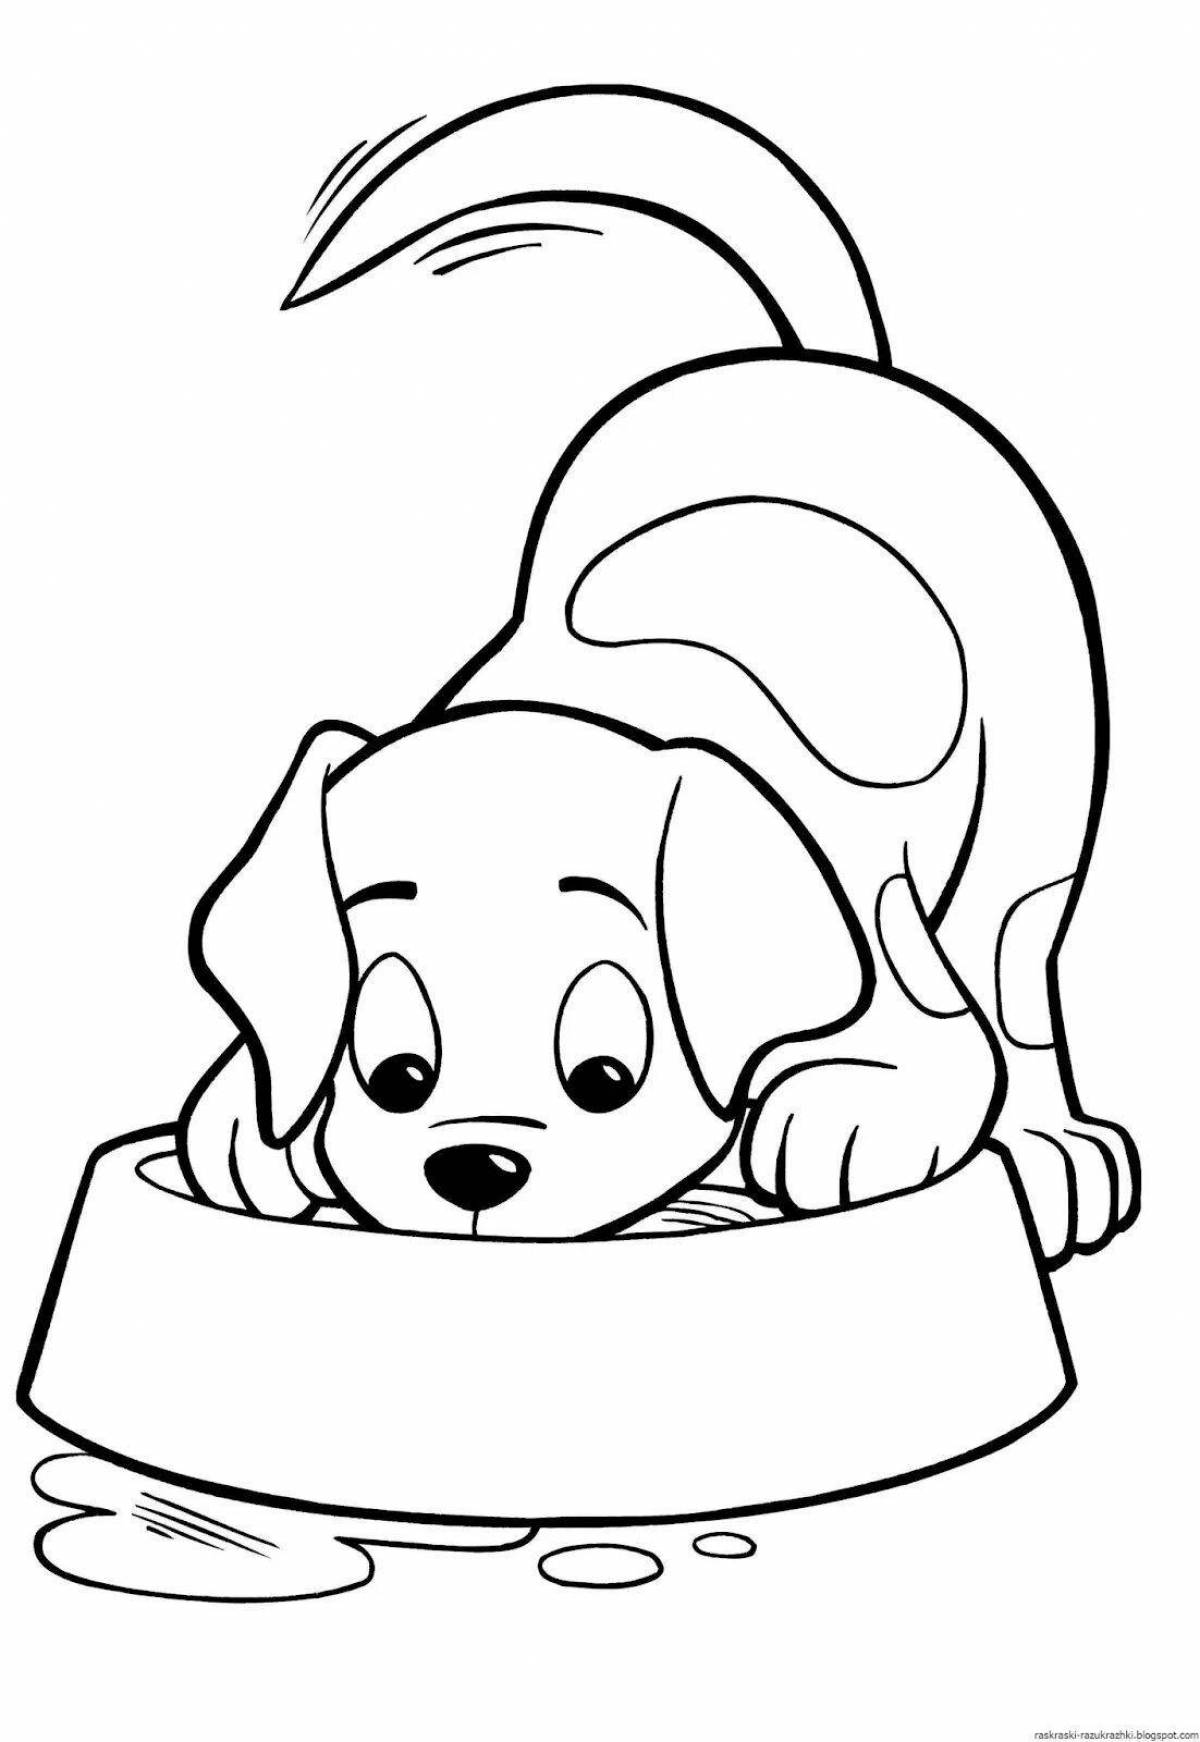 Humorous dog coloring book for children 5-6 years old